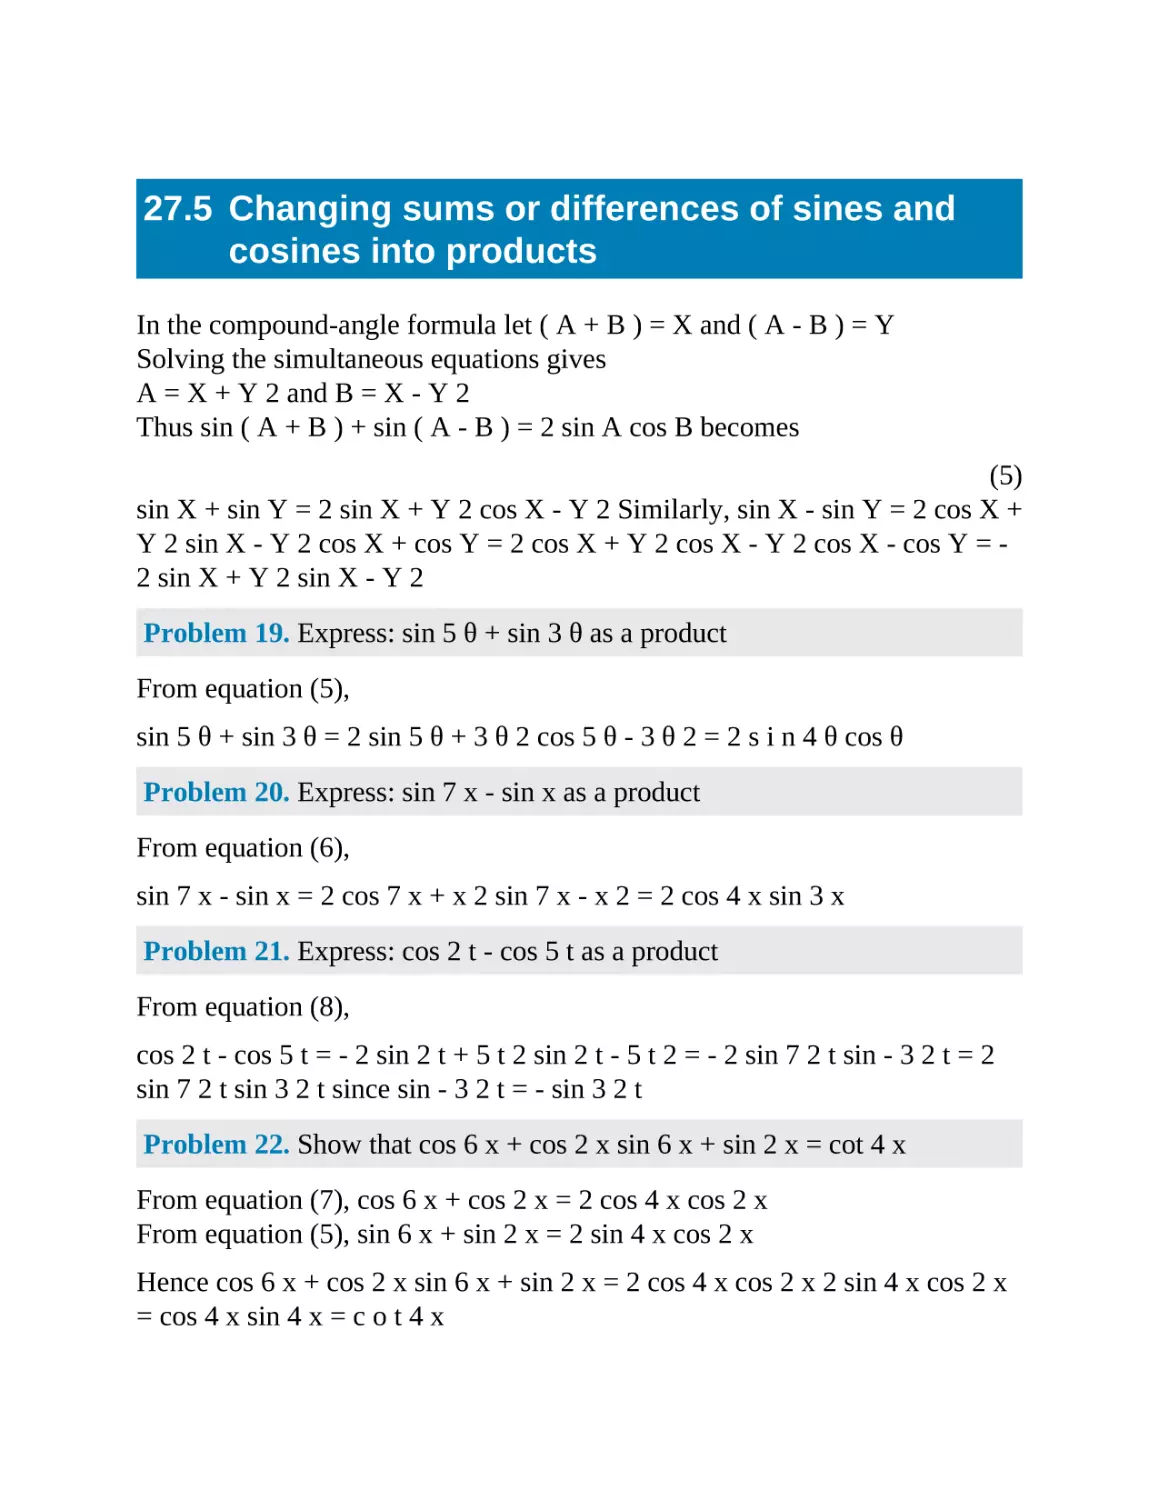 27.5 Changing sums or differences of sines and cosines into products